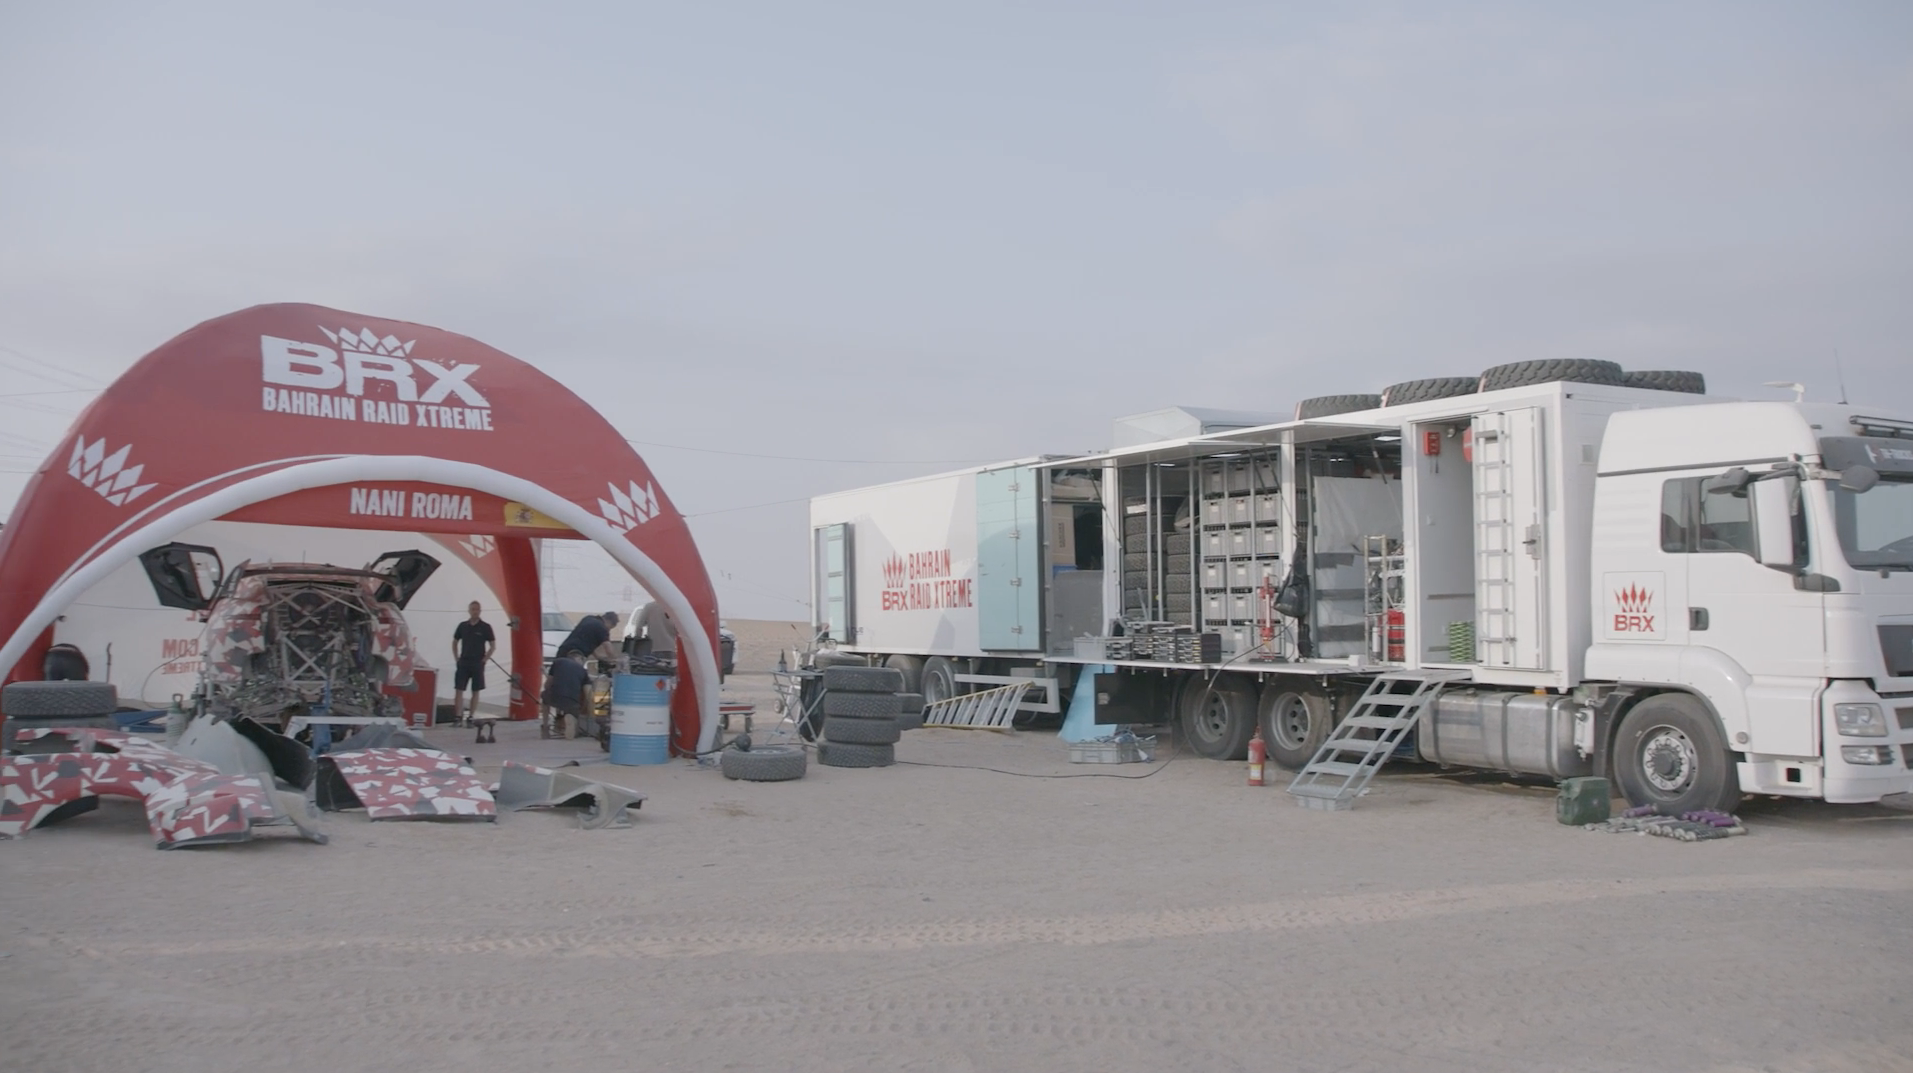 At the Dakar Rally, Team BRX operates out of a basecamp called "The Bivouac" filled with over a dozen vehicles, support personnel, and equipment. The team is one of the largest and best equipped to participate at Dakar in 2021.